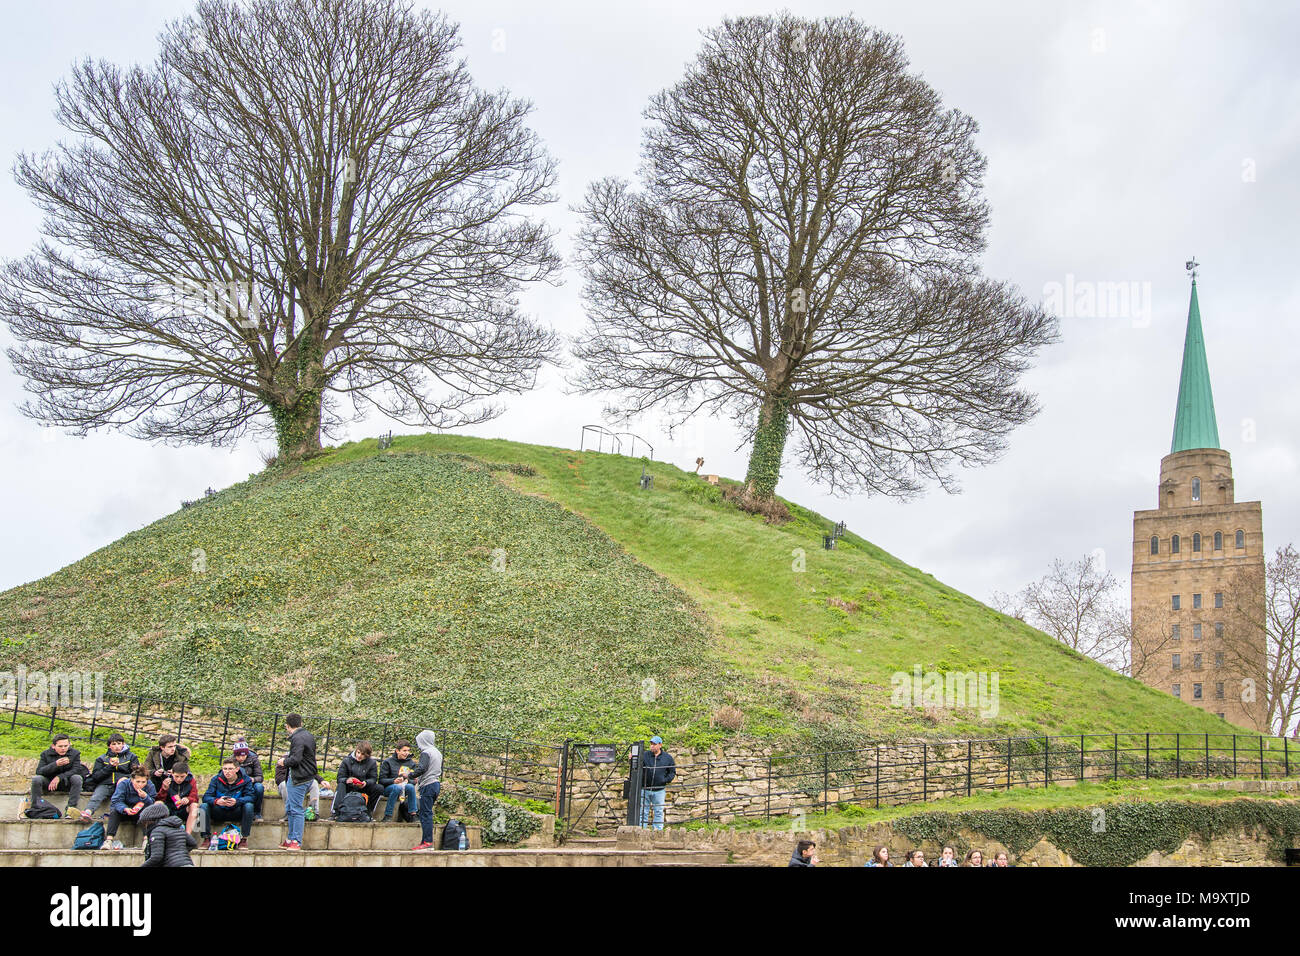 A group of tourist students eat lunch at the foot of the norman built mound (motte) of the castle in the town of Oxford, England, with the tower of th Stock Photo